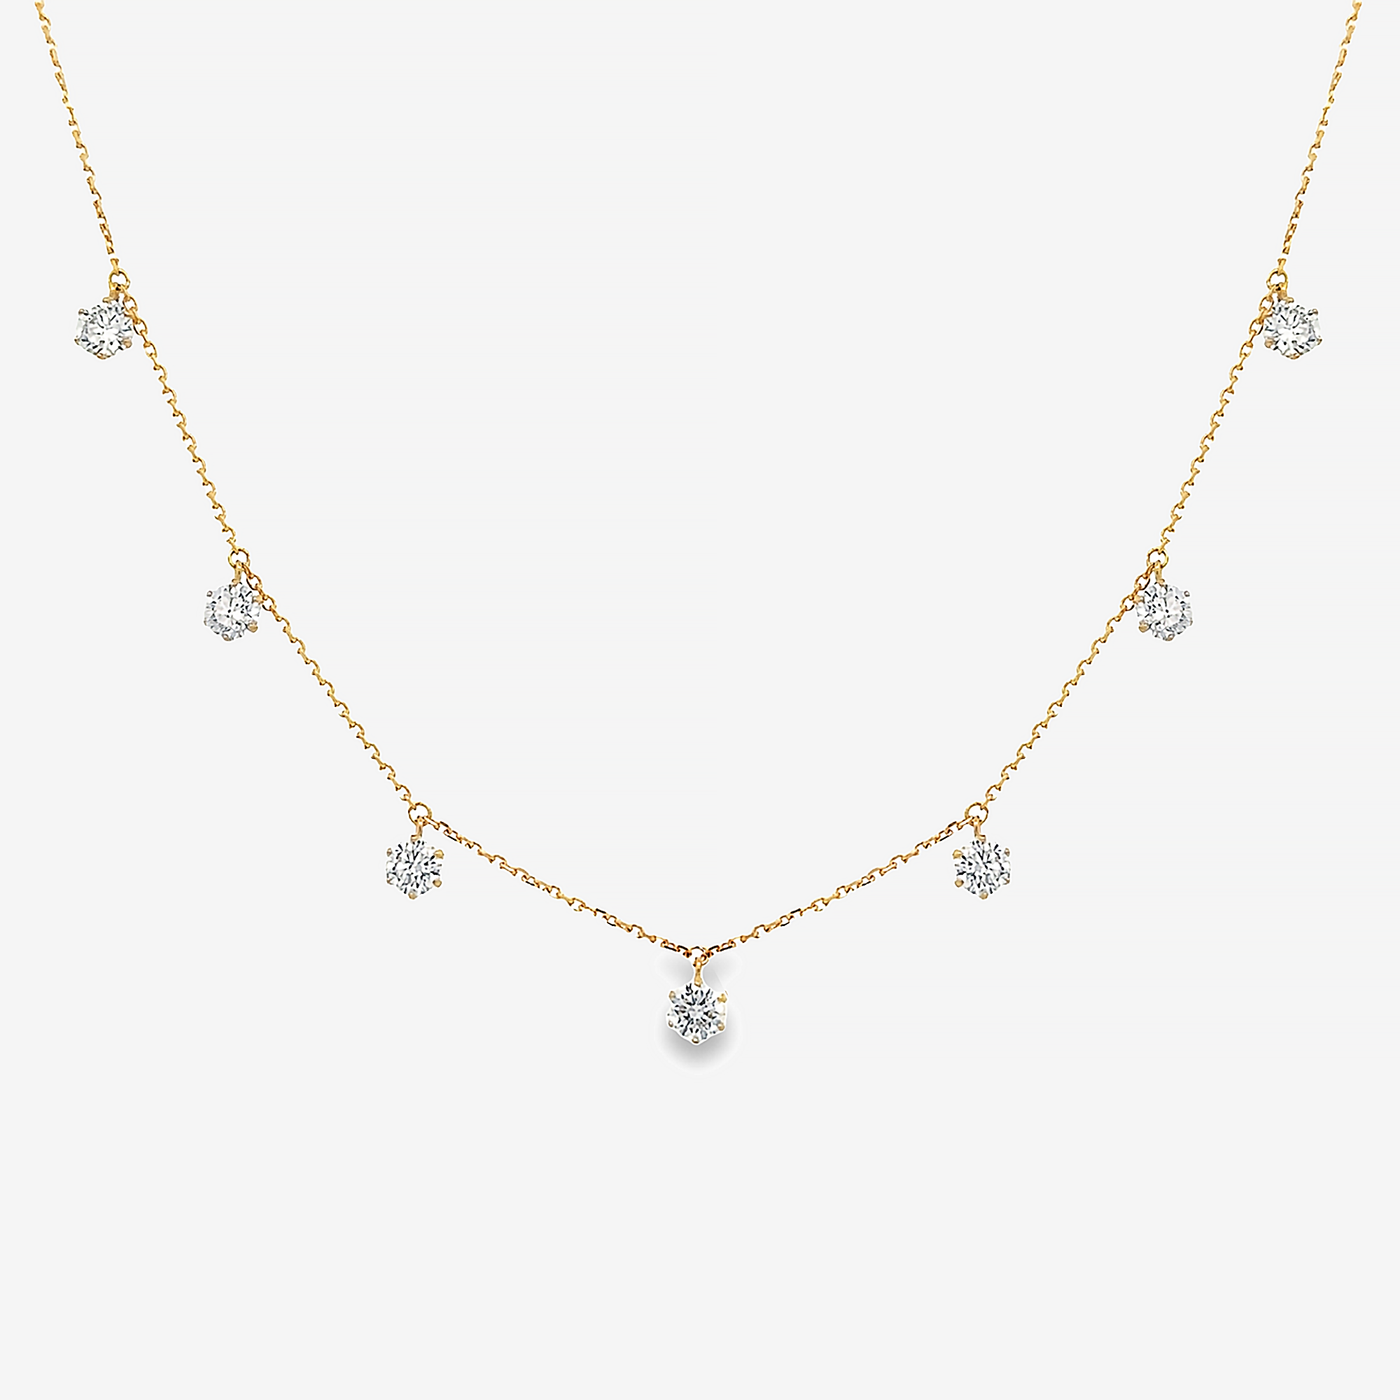 7 Drops By The Yard 1.45CT Diamond Necklace